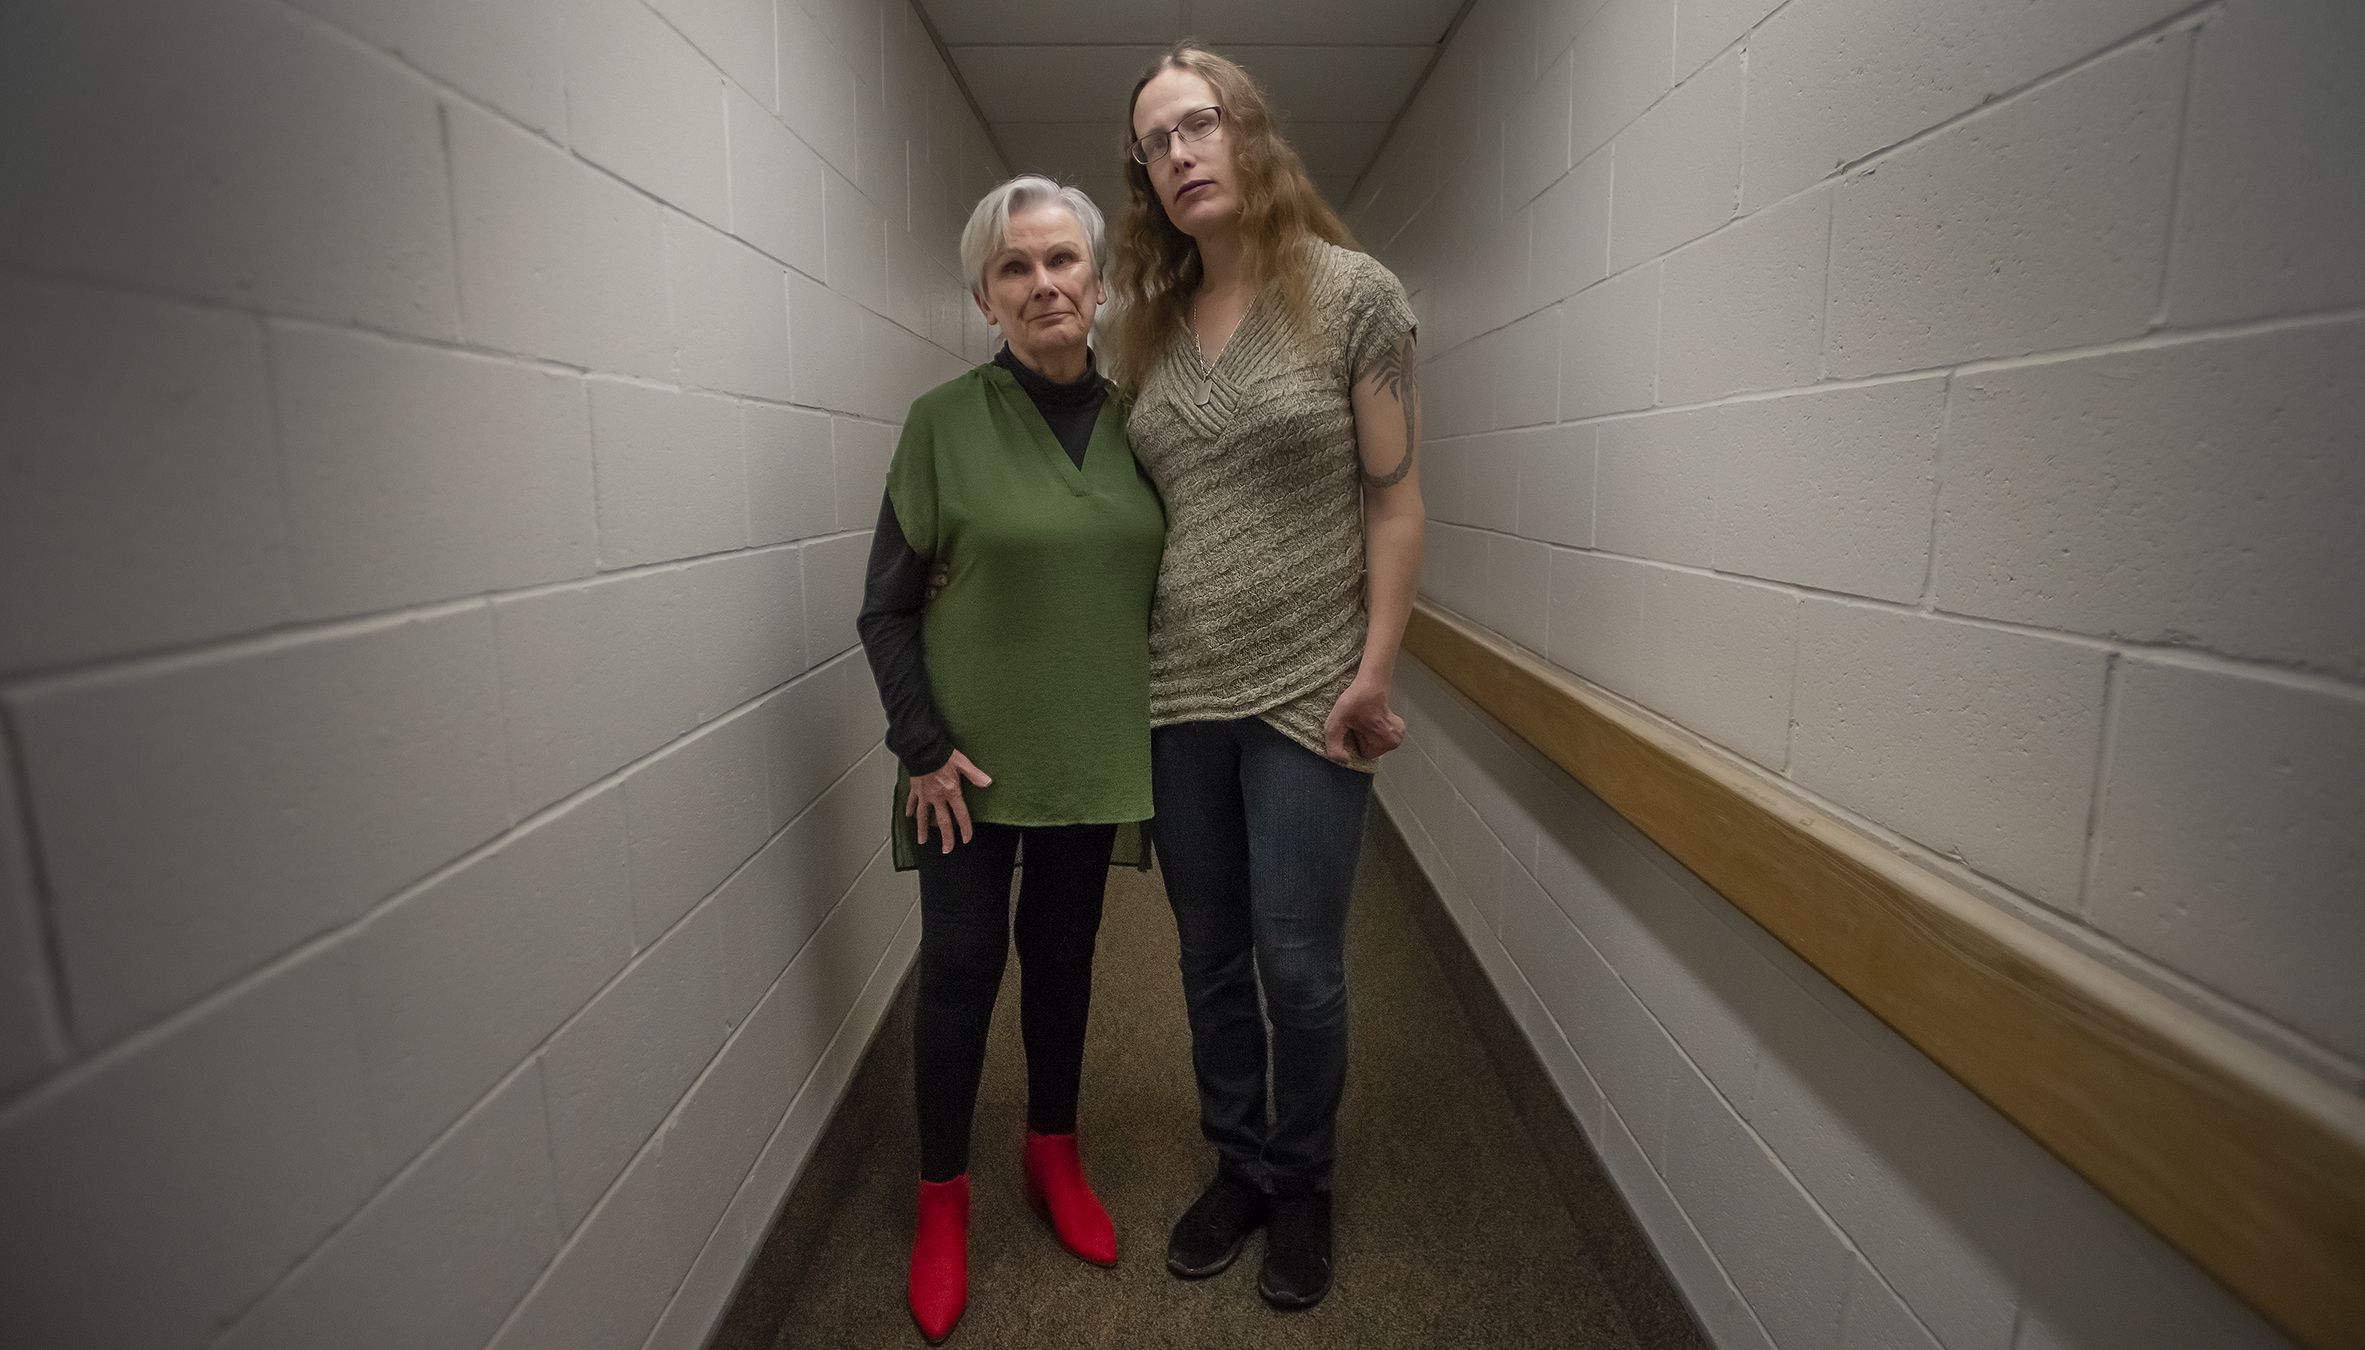 Shemale Forced Mother Videoes - Why this transgender woman is seeking assisted suicide | National Post